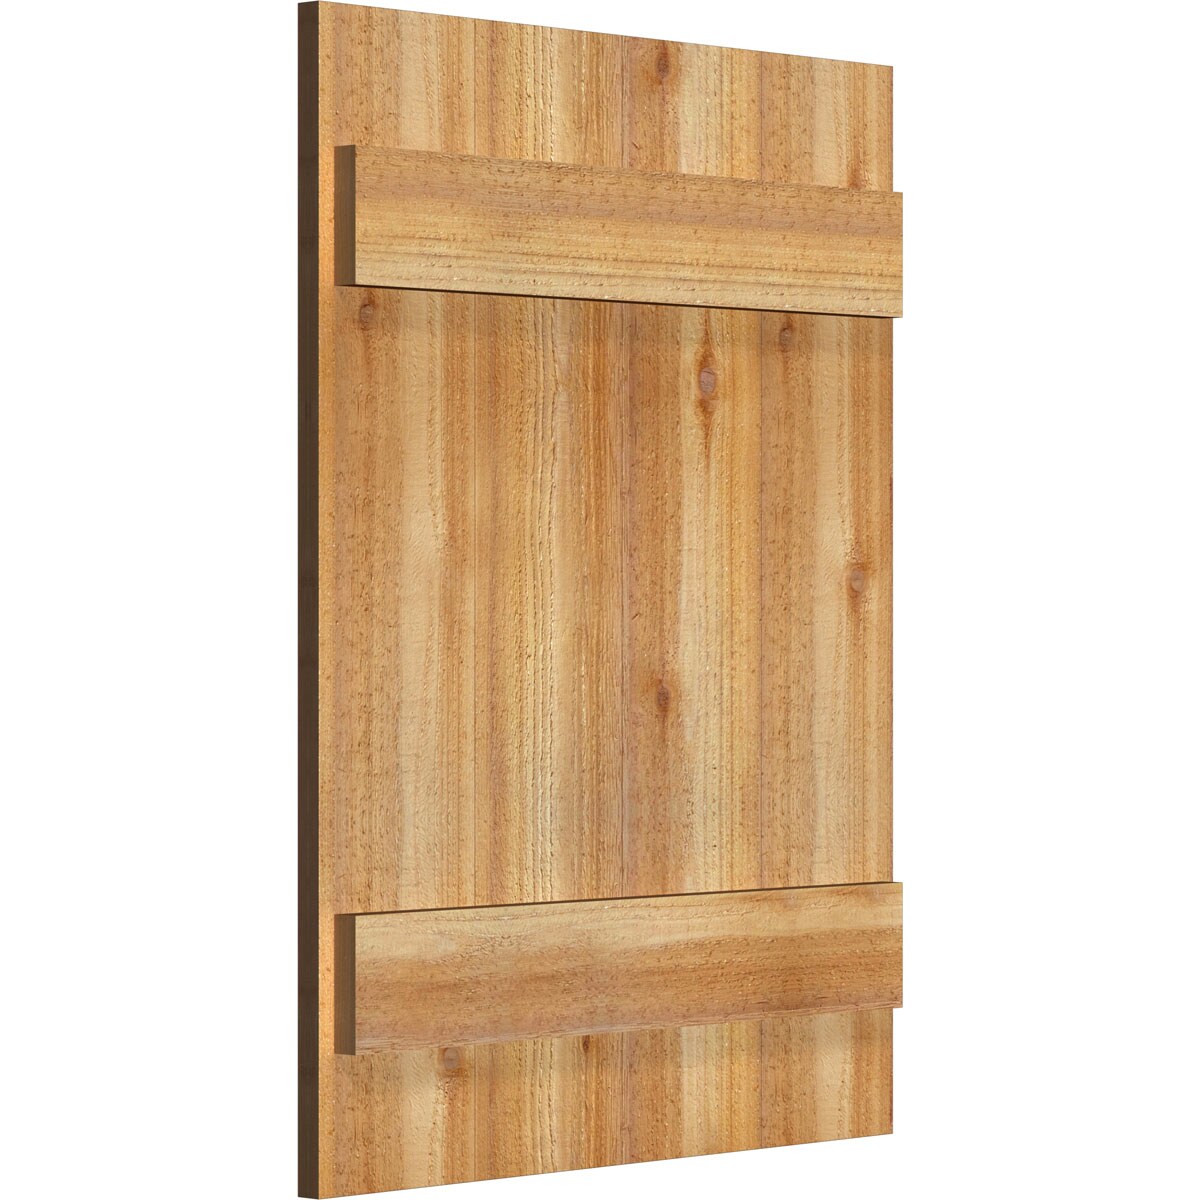 Ekena Millwork 2-Pack 21.5-in W x 29-in H Unfinished Board and Batten Wood Western Red cedar Exterior Shutters